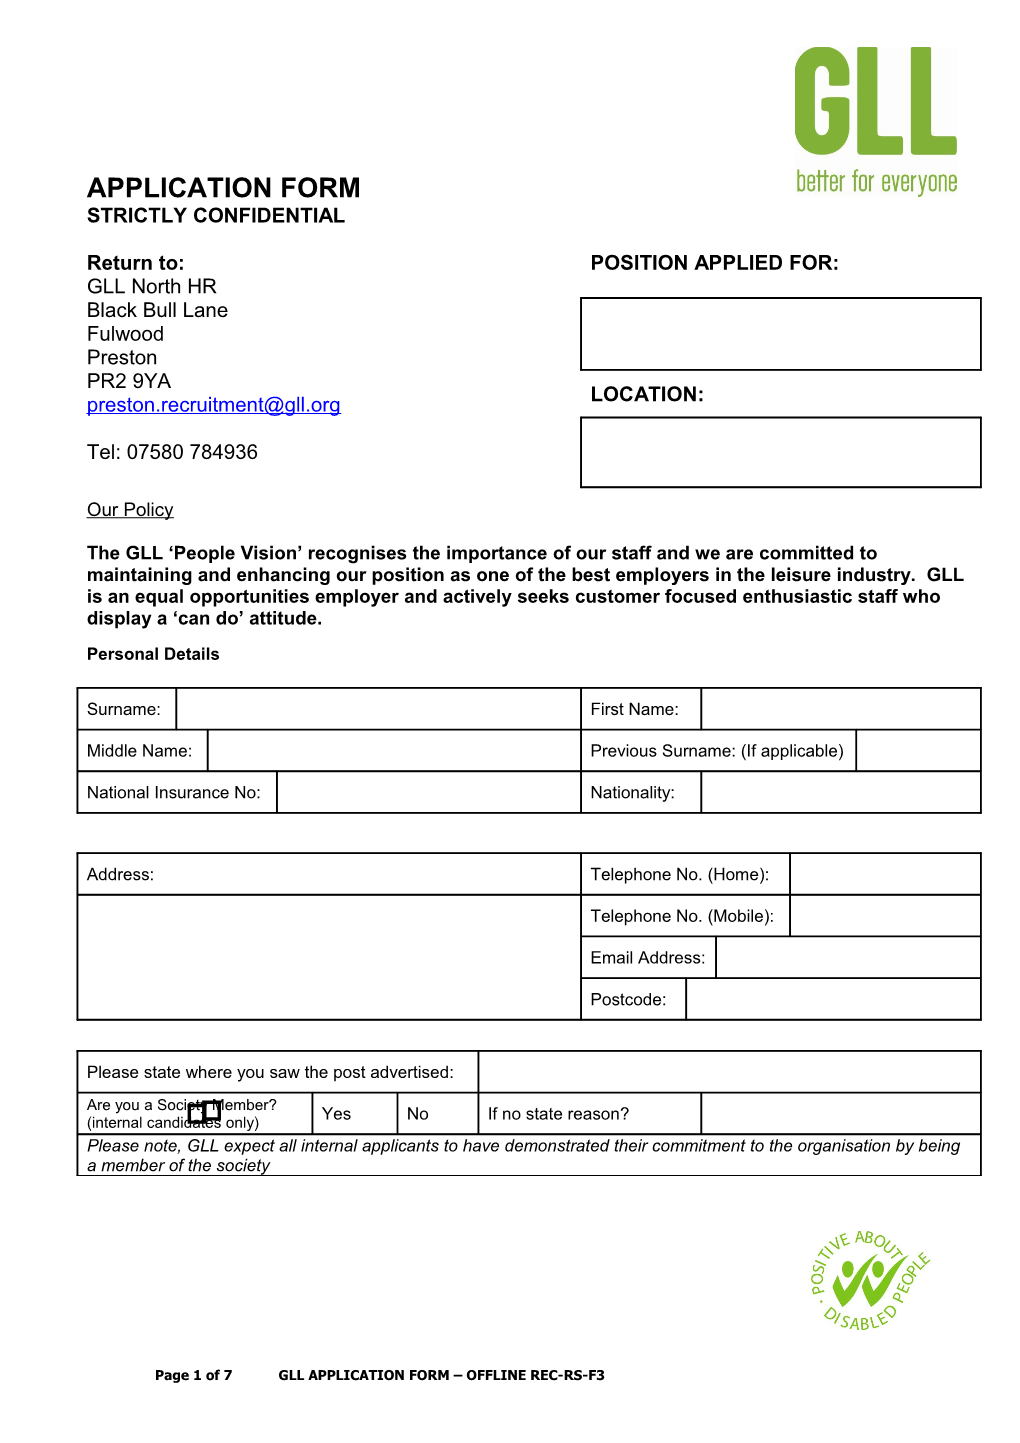 Page 6 of 6 GLL APPLICATION FORM OFFLINE REC-RS-F3